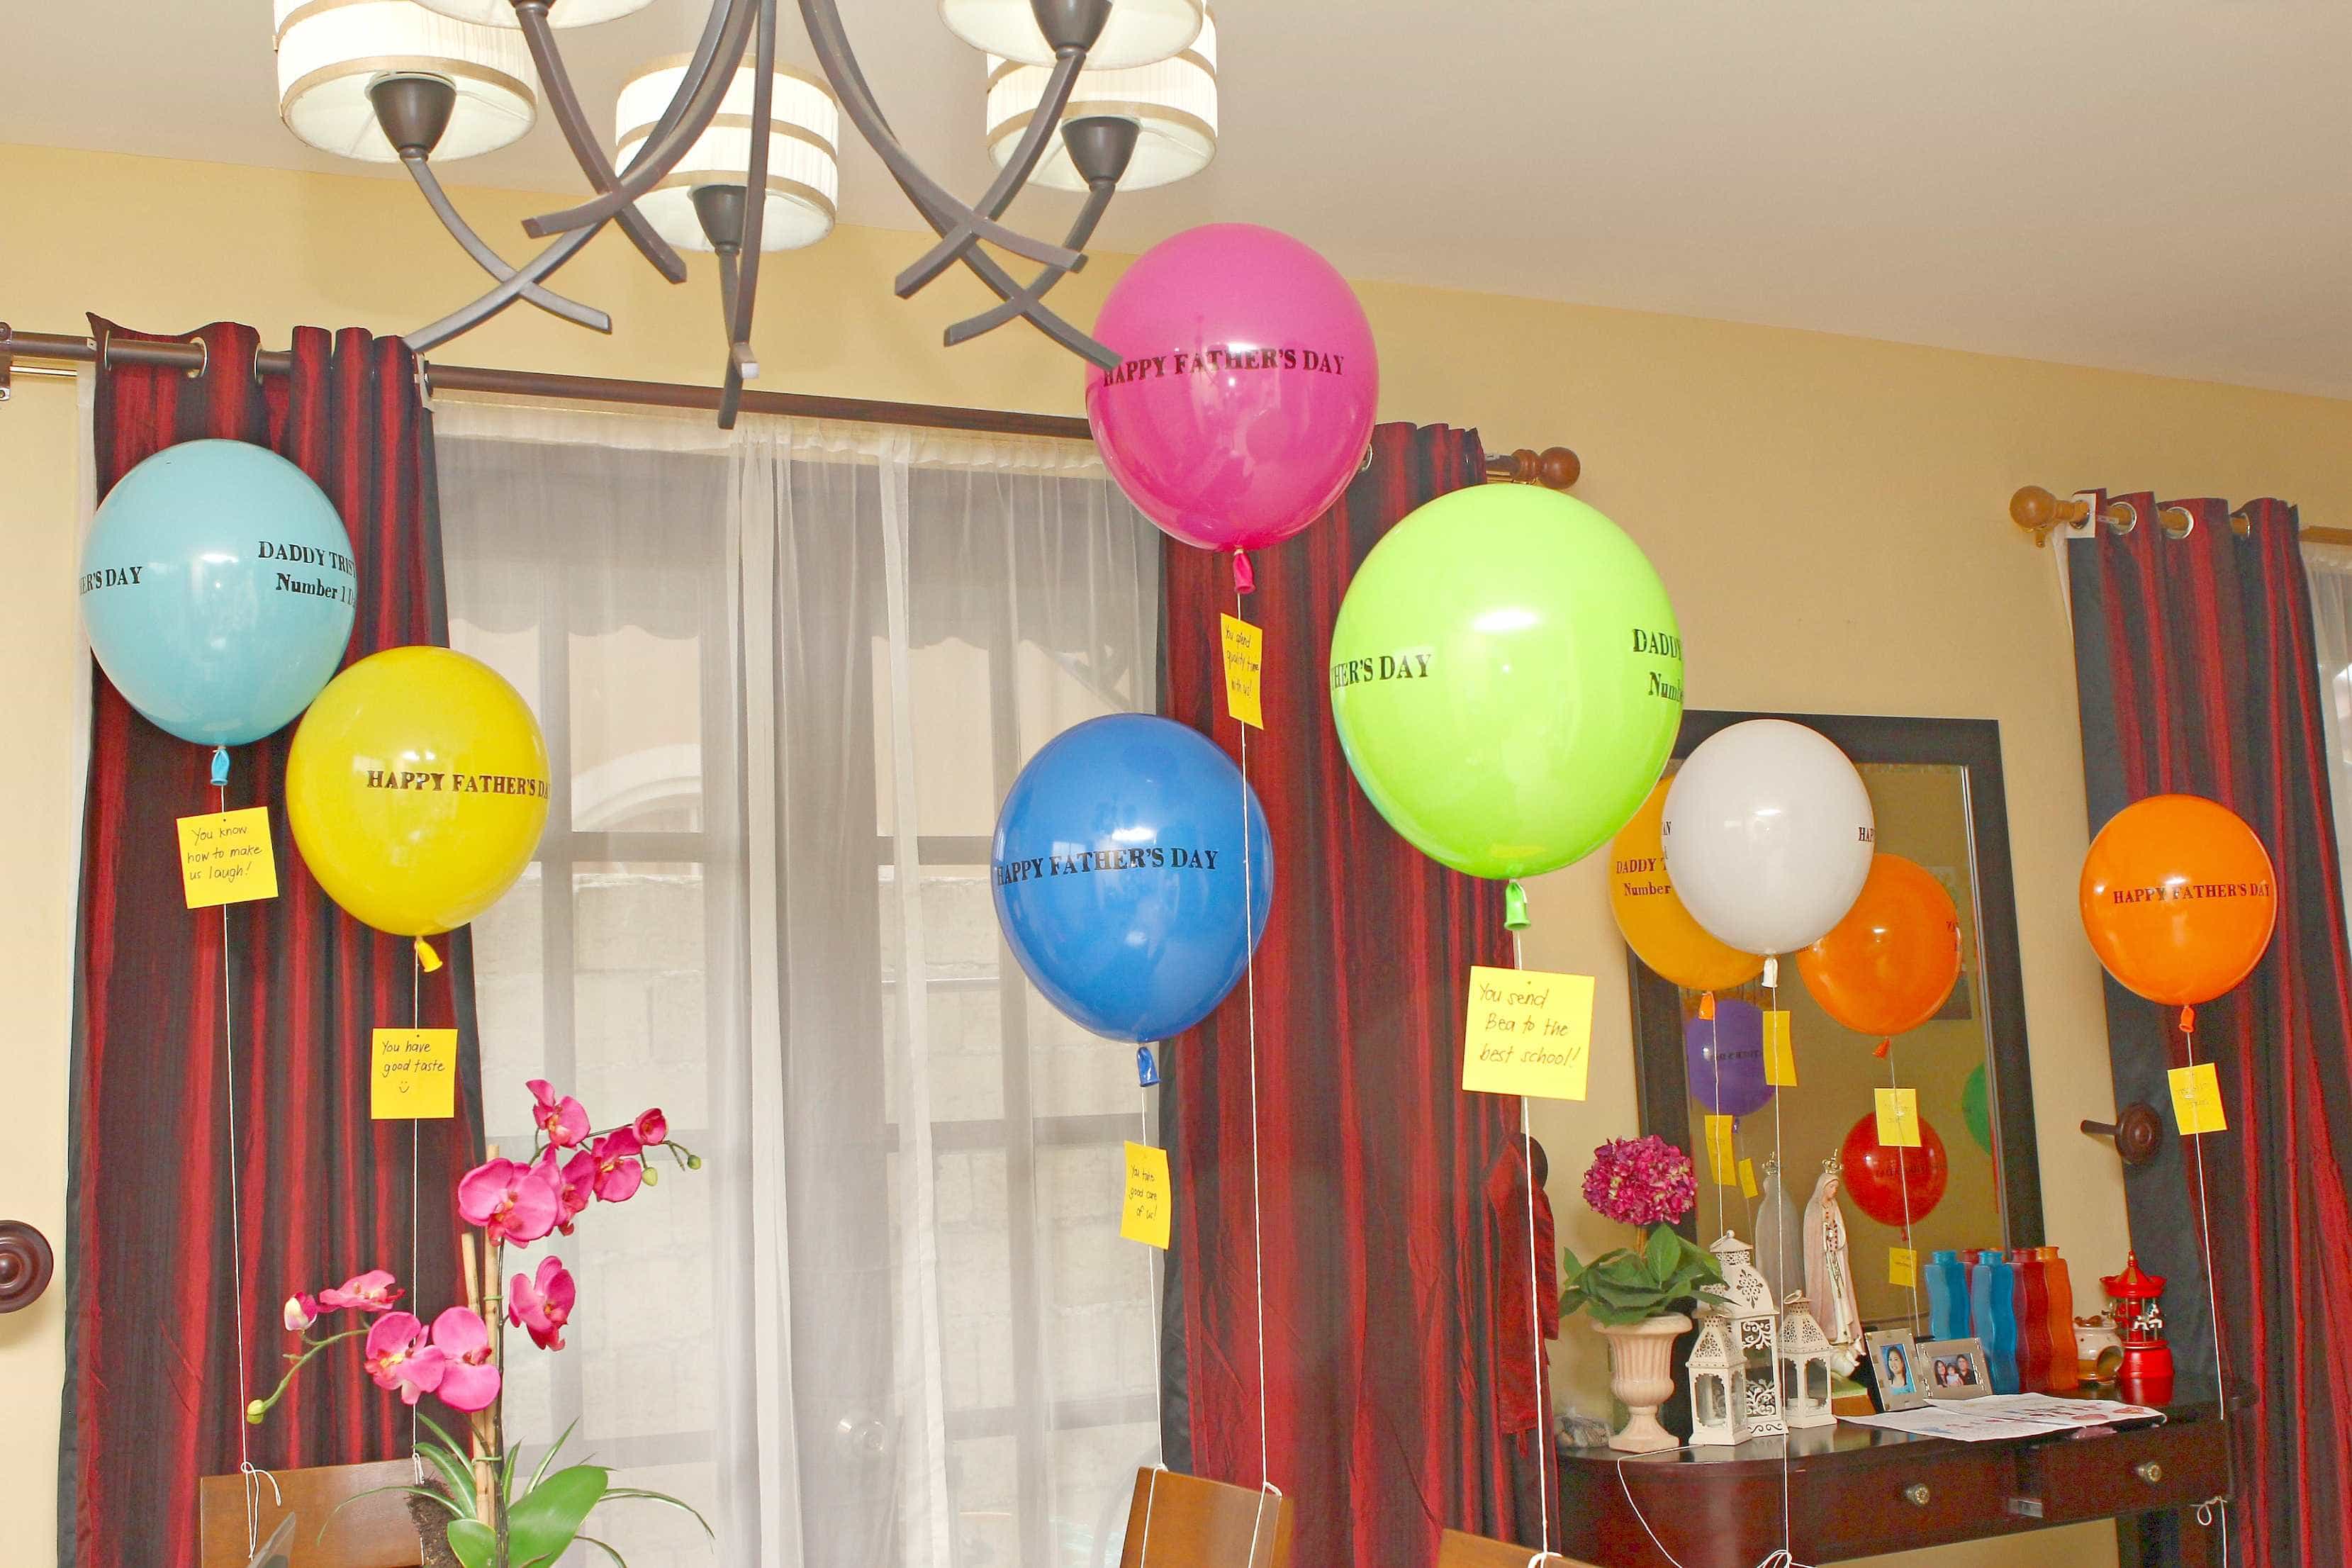 Balloons with notes